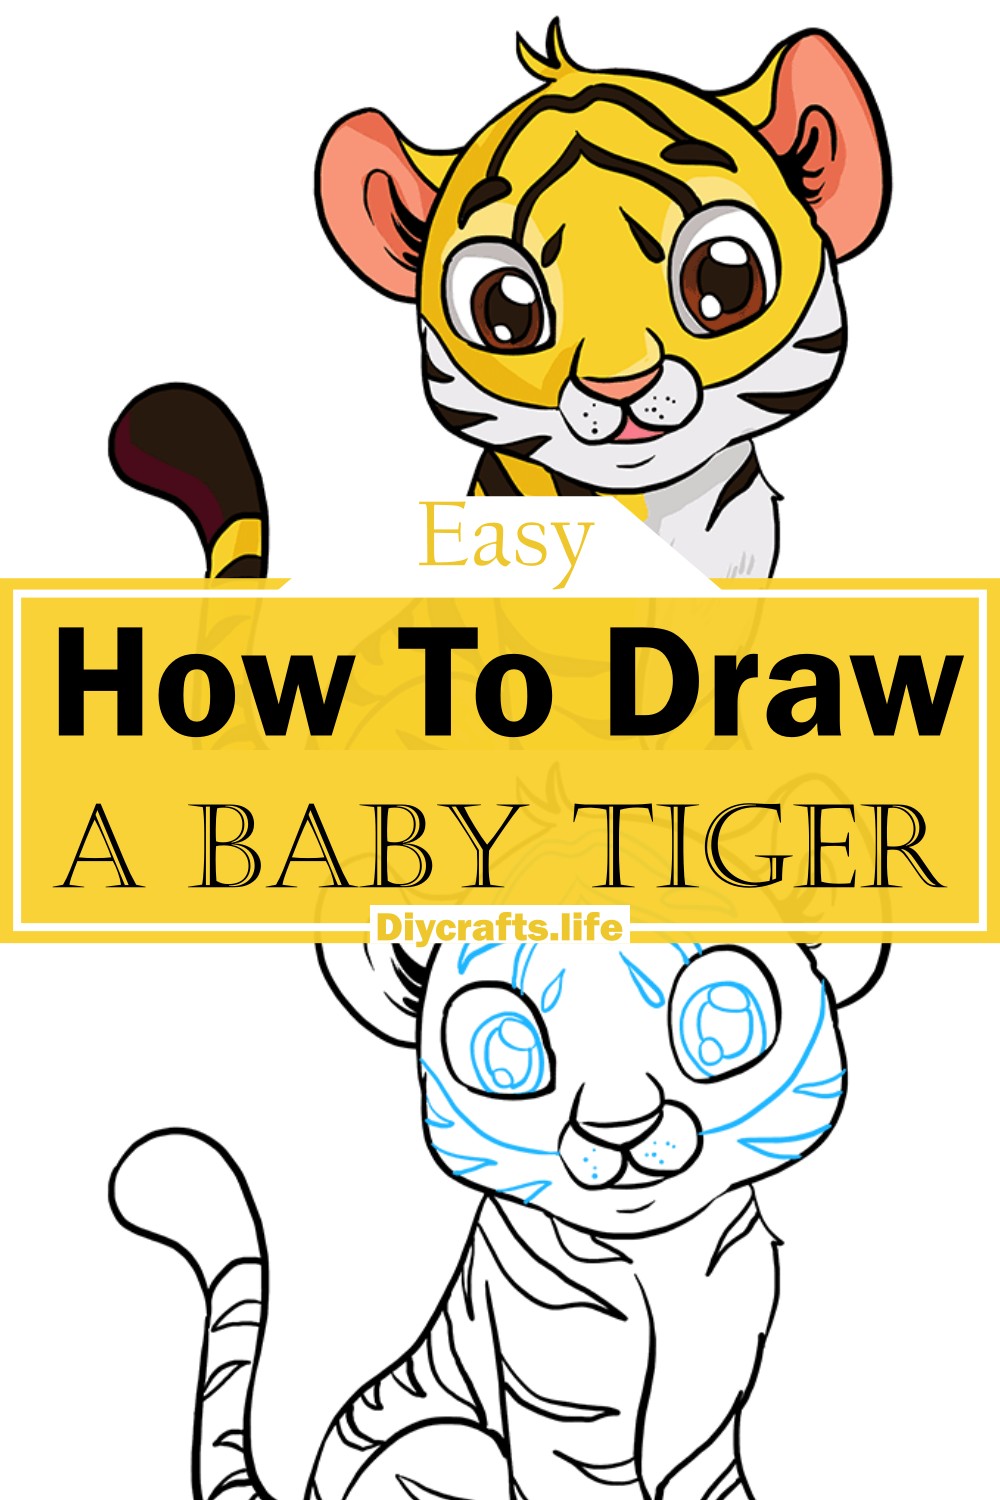 How To Draw A Baby Tiger